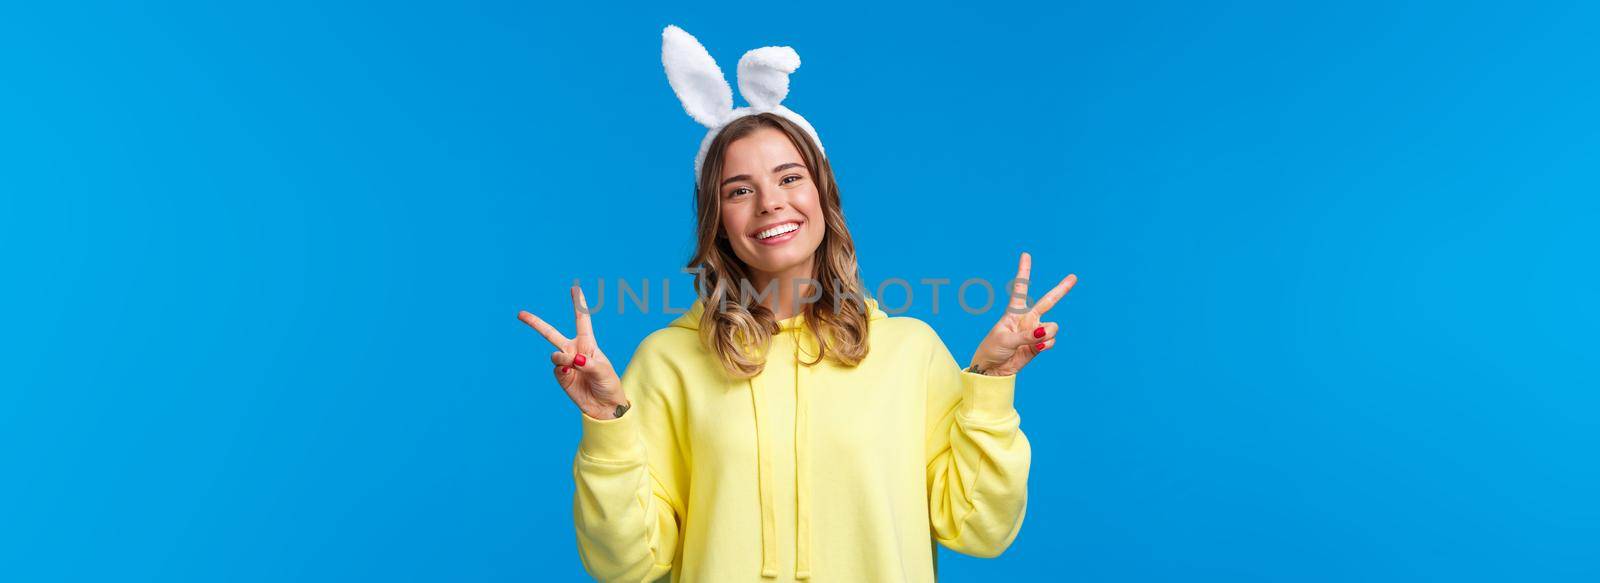 Holidays, traditions and celebration concept. Kawaii young blond girl in rabbit ears showing peace gesture and smiling, having fun, enjoying party, standing blue background.